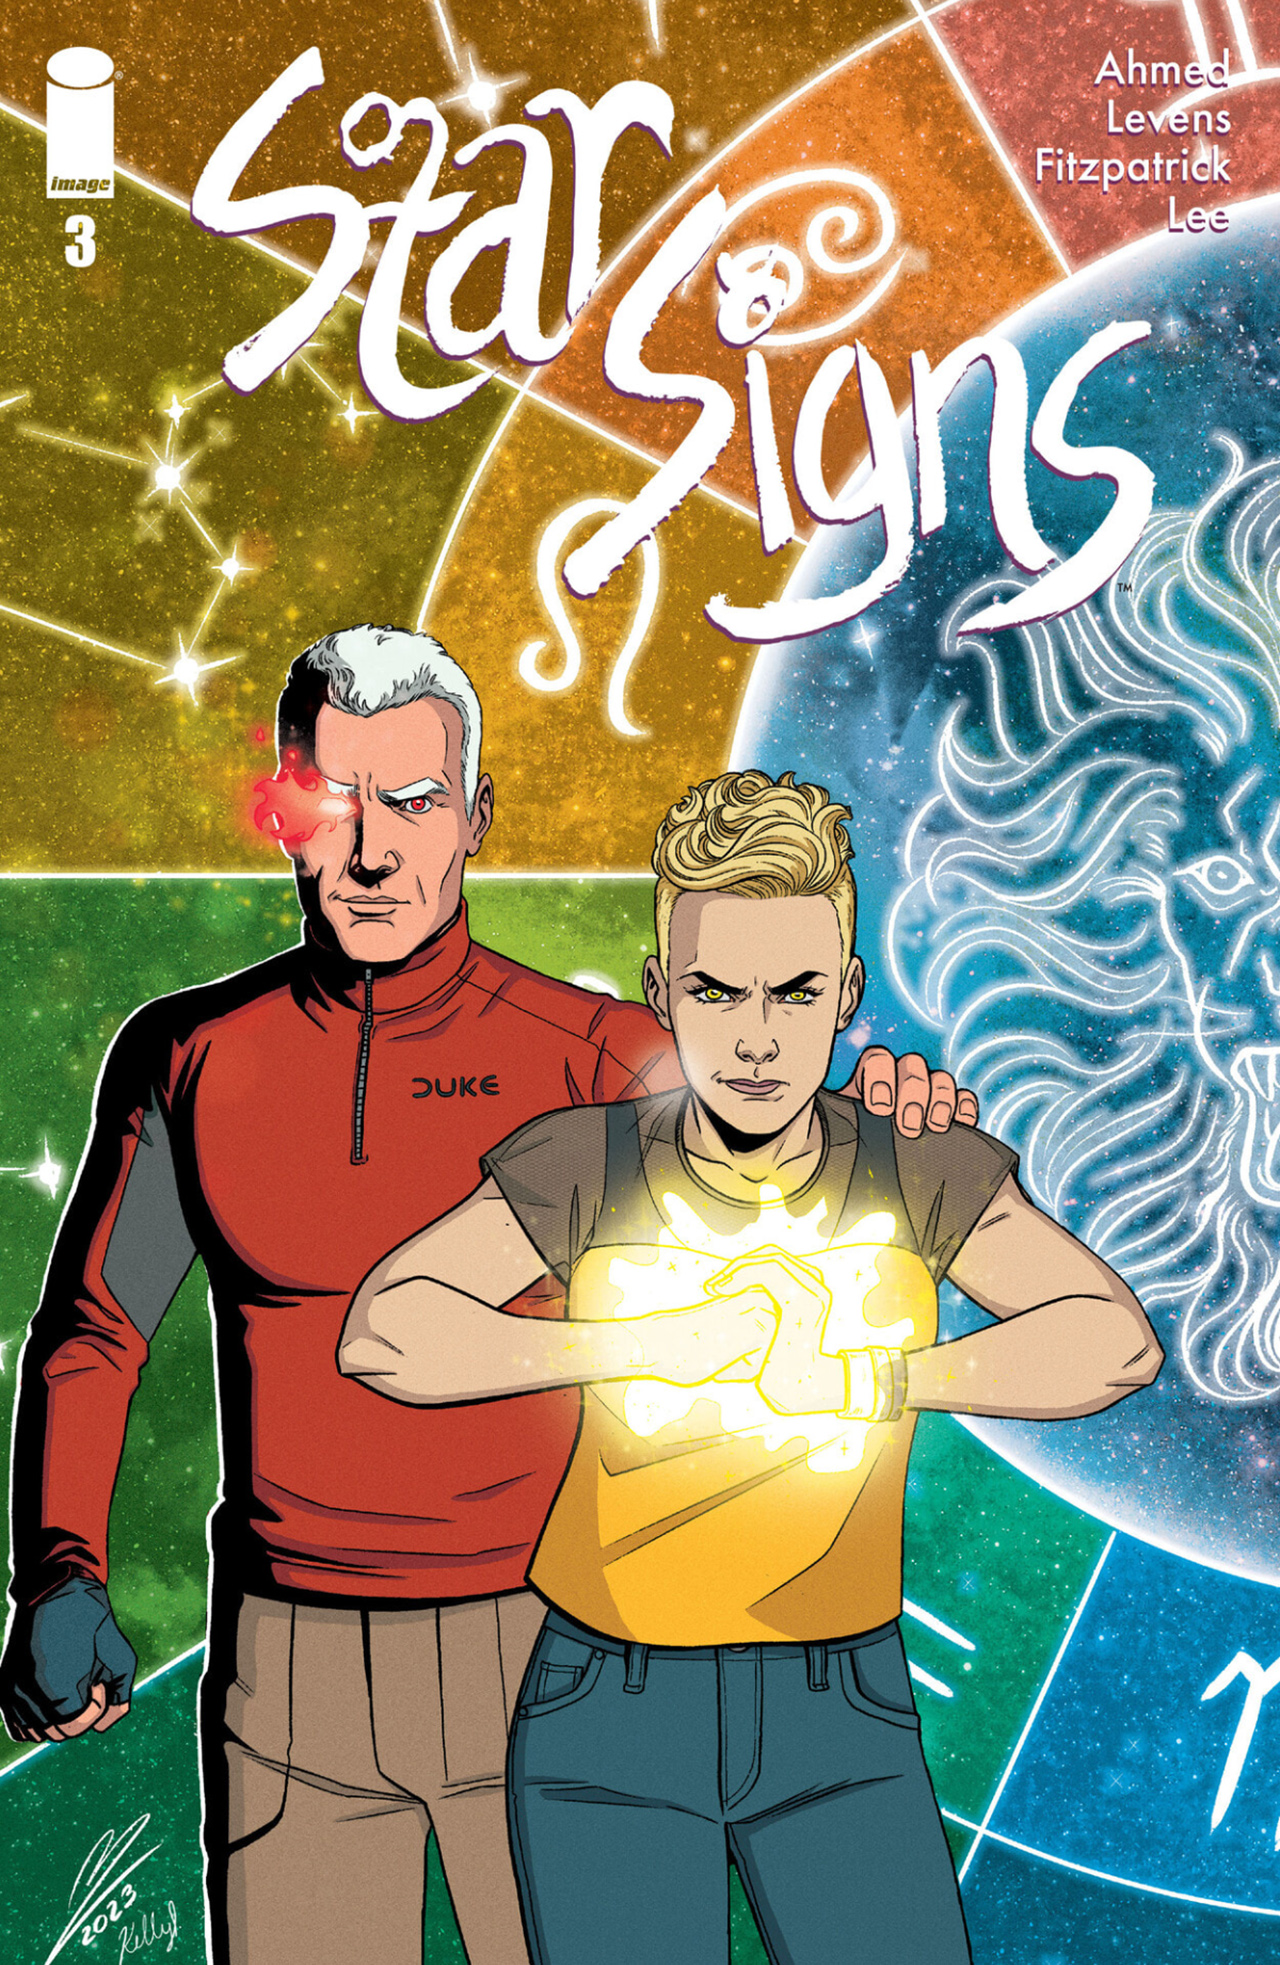 Read online Starsigns comic -  Issue #3 - 1